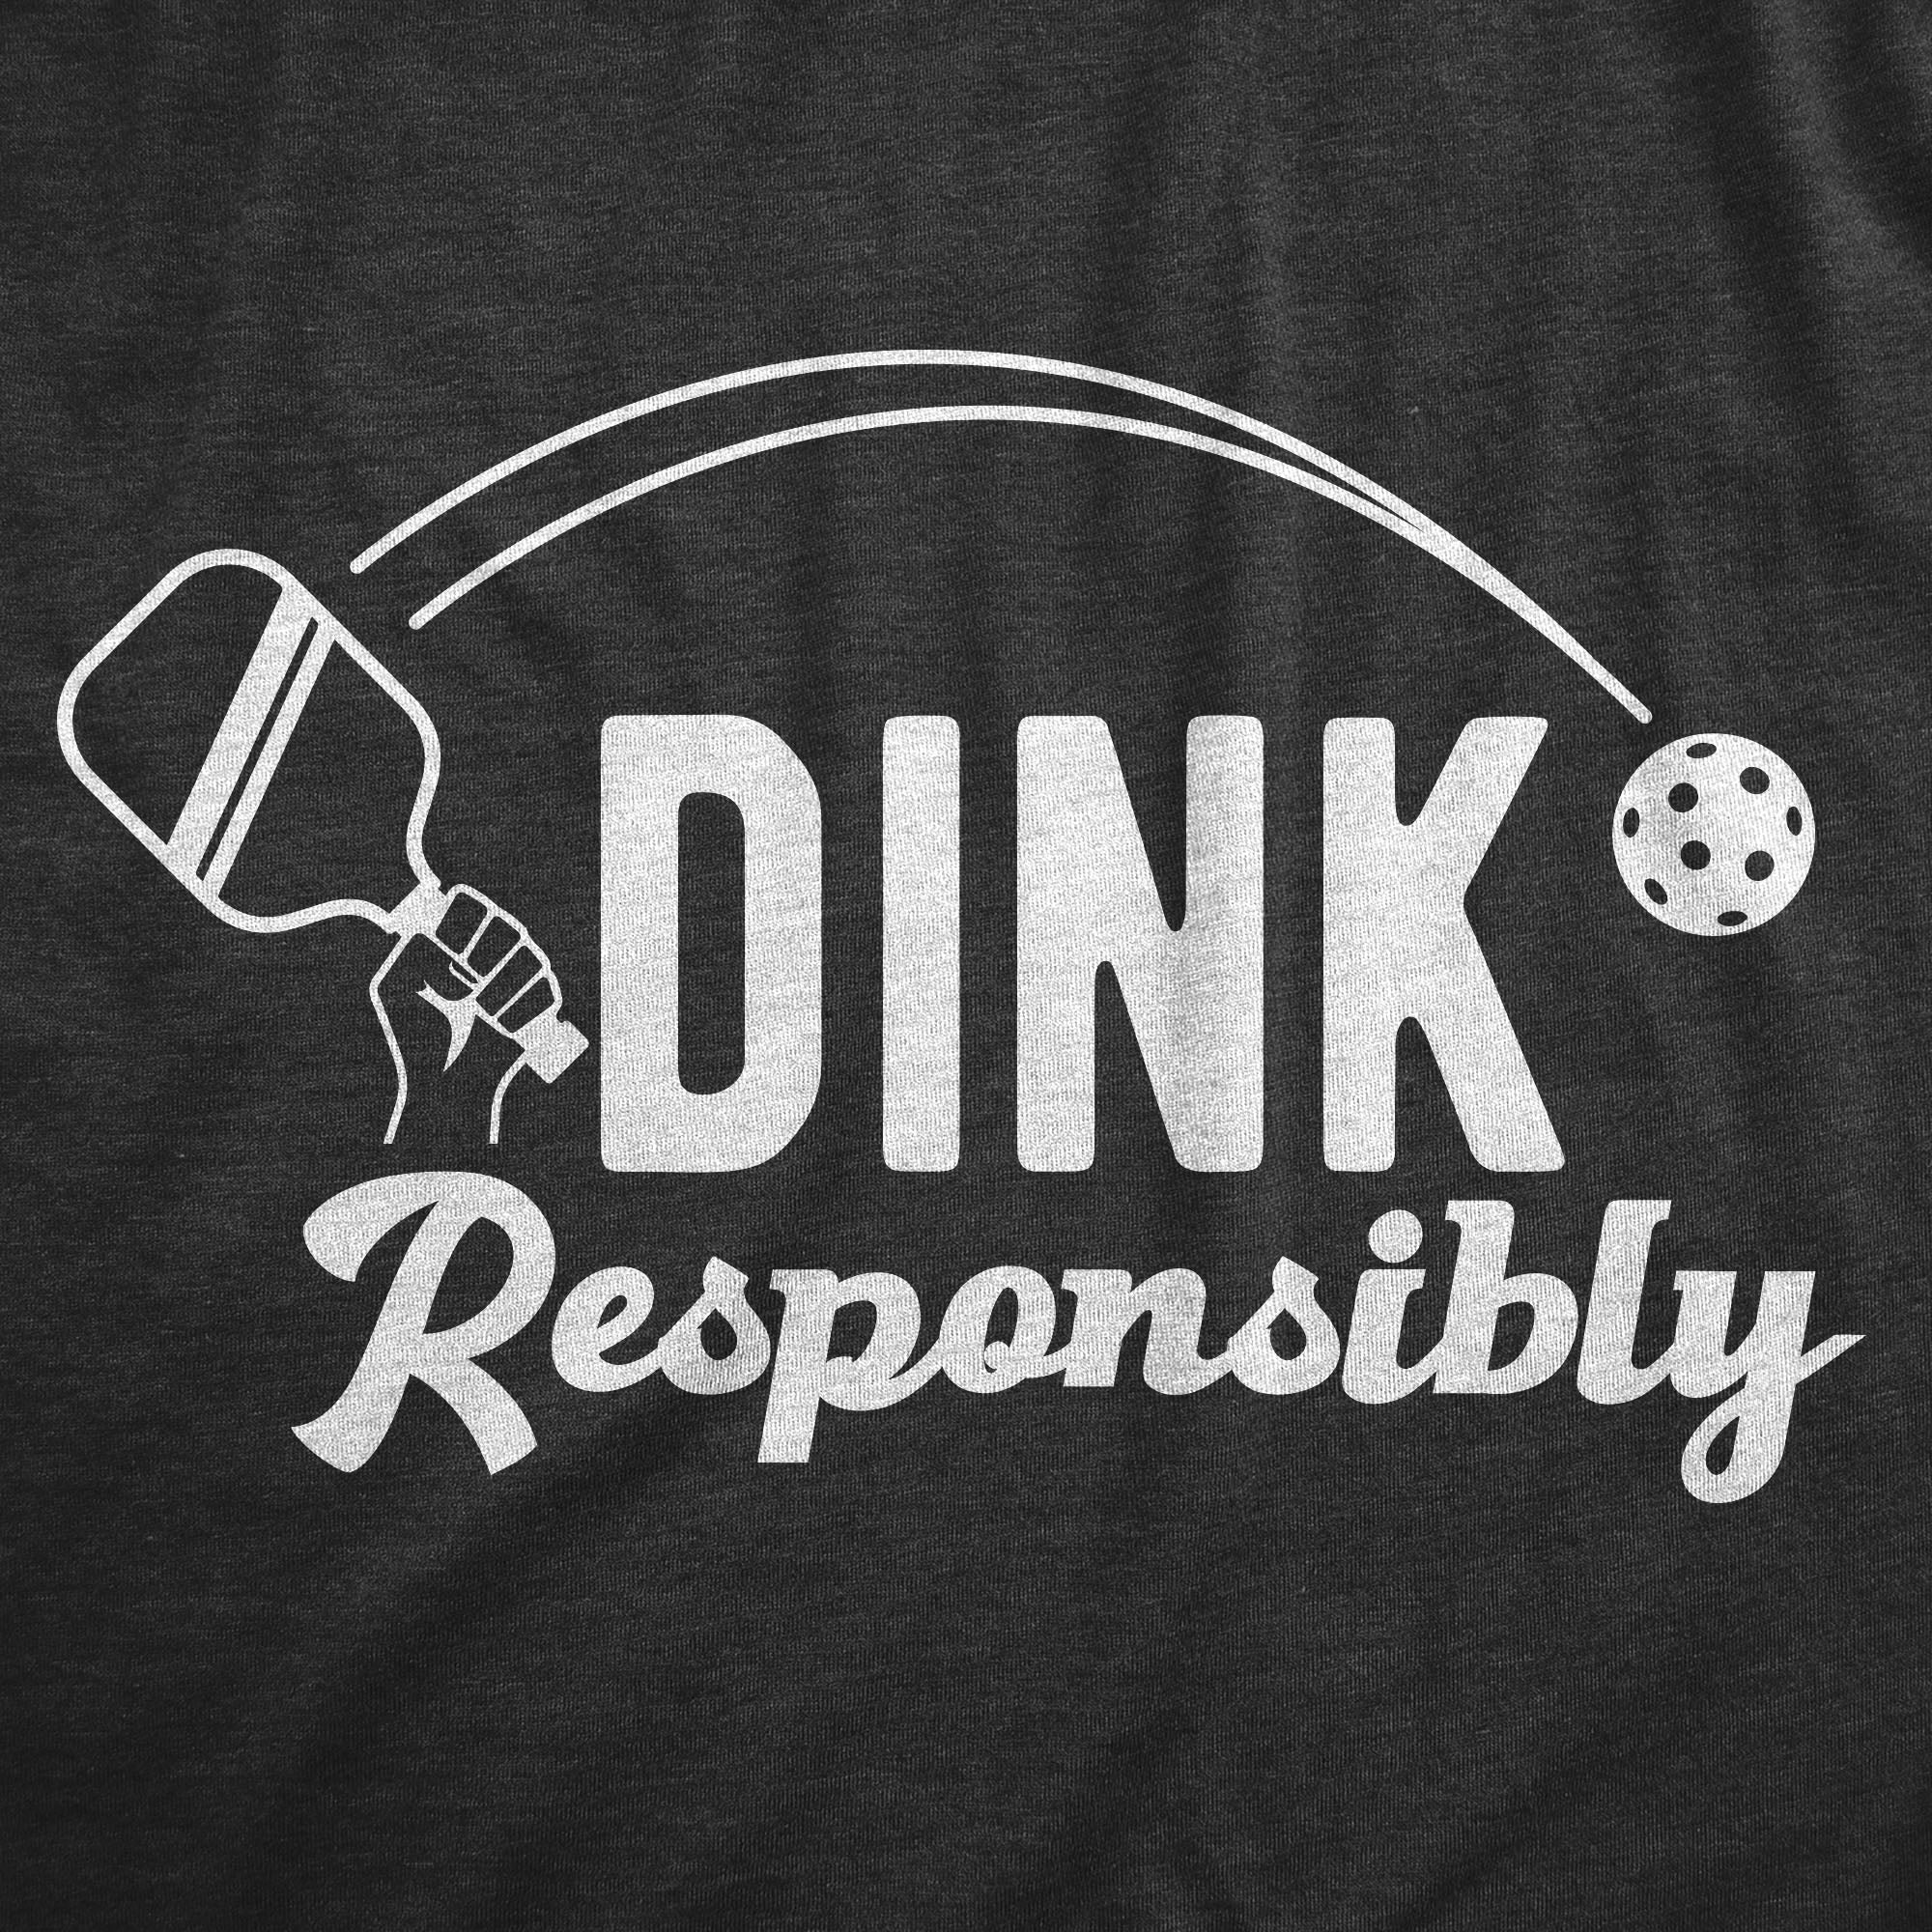 Funny Heather Black - Dink Responsibly Dink Responsibly Mens T Shirt Nerdy Sarcastic Tee